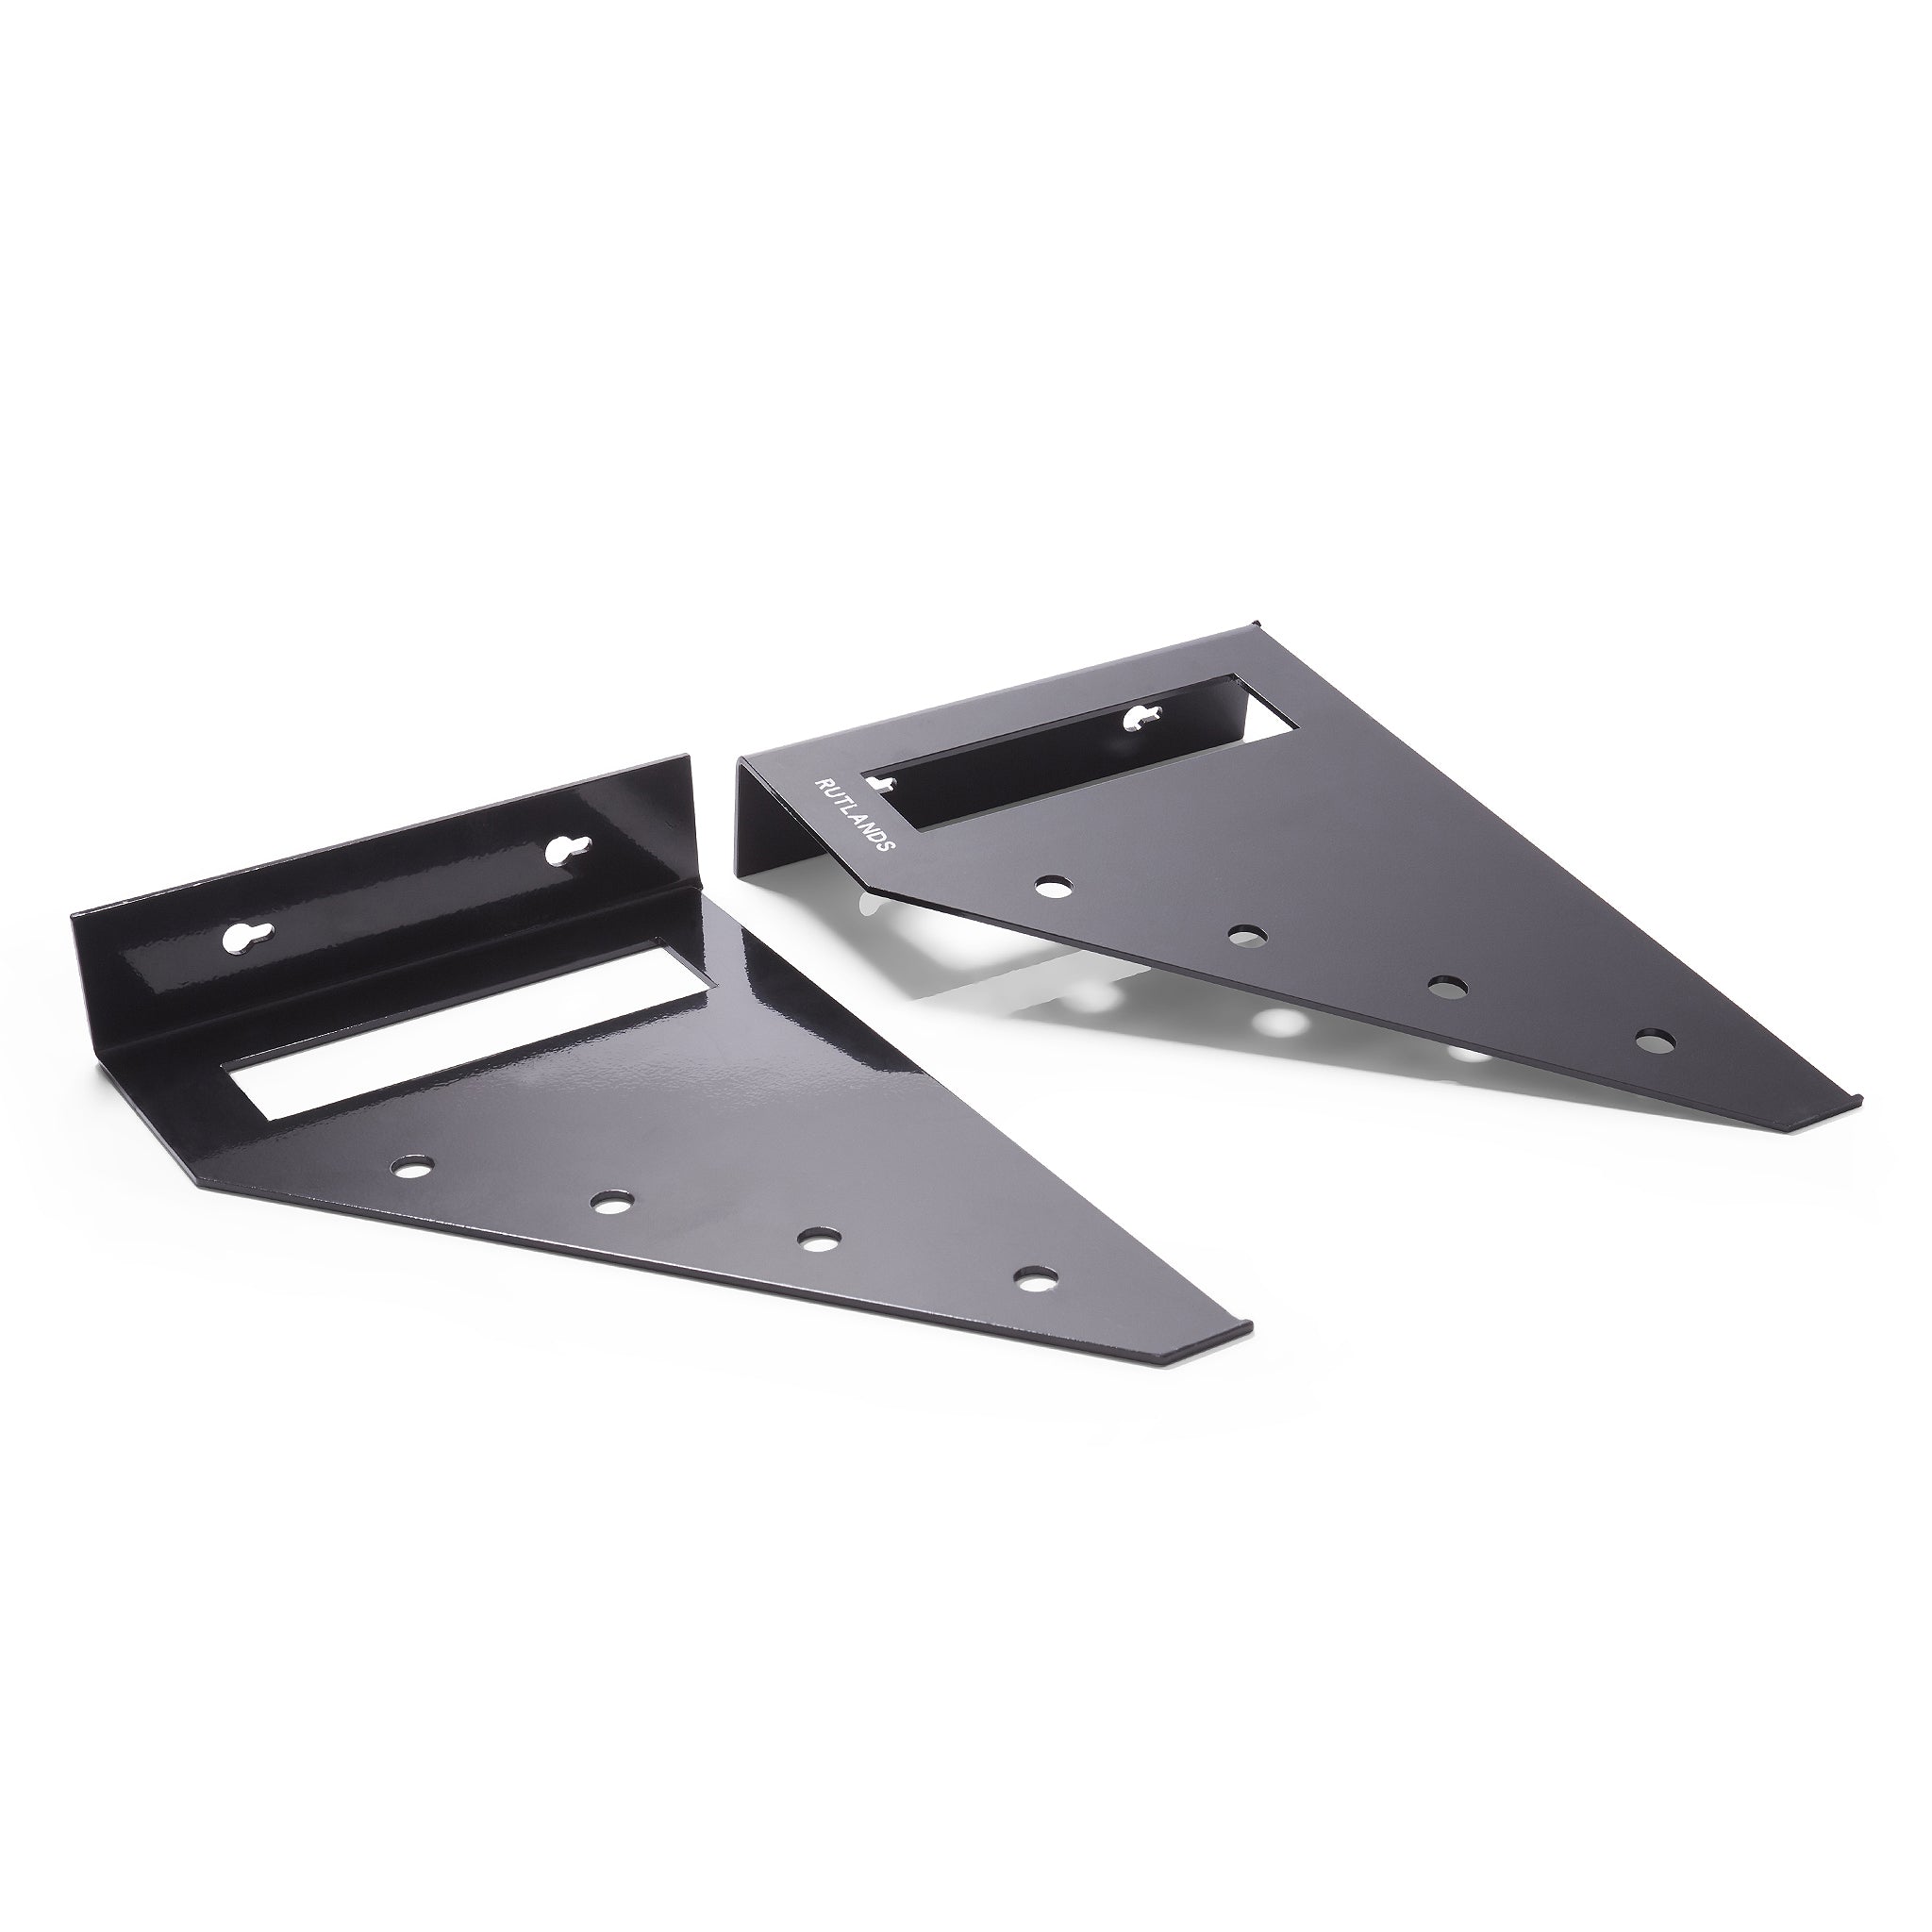 Clamp Rack - Pack of 2